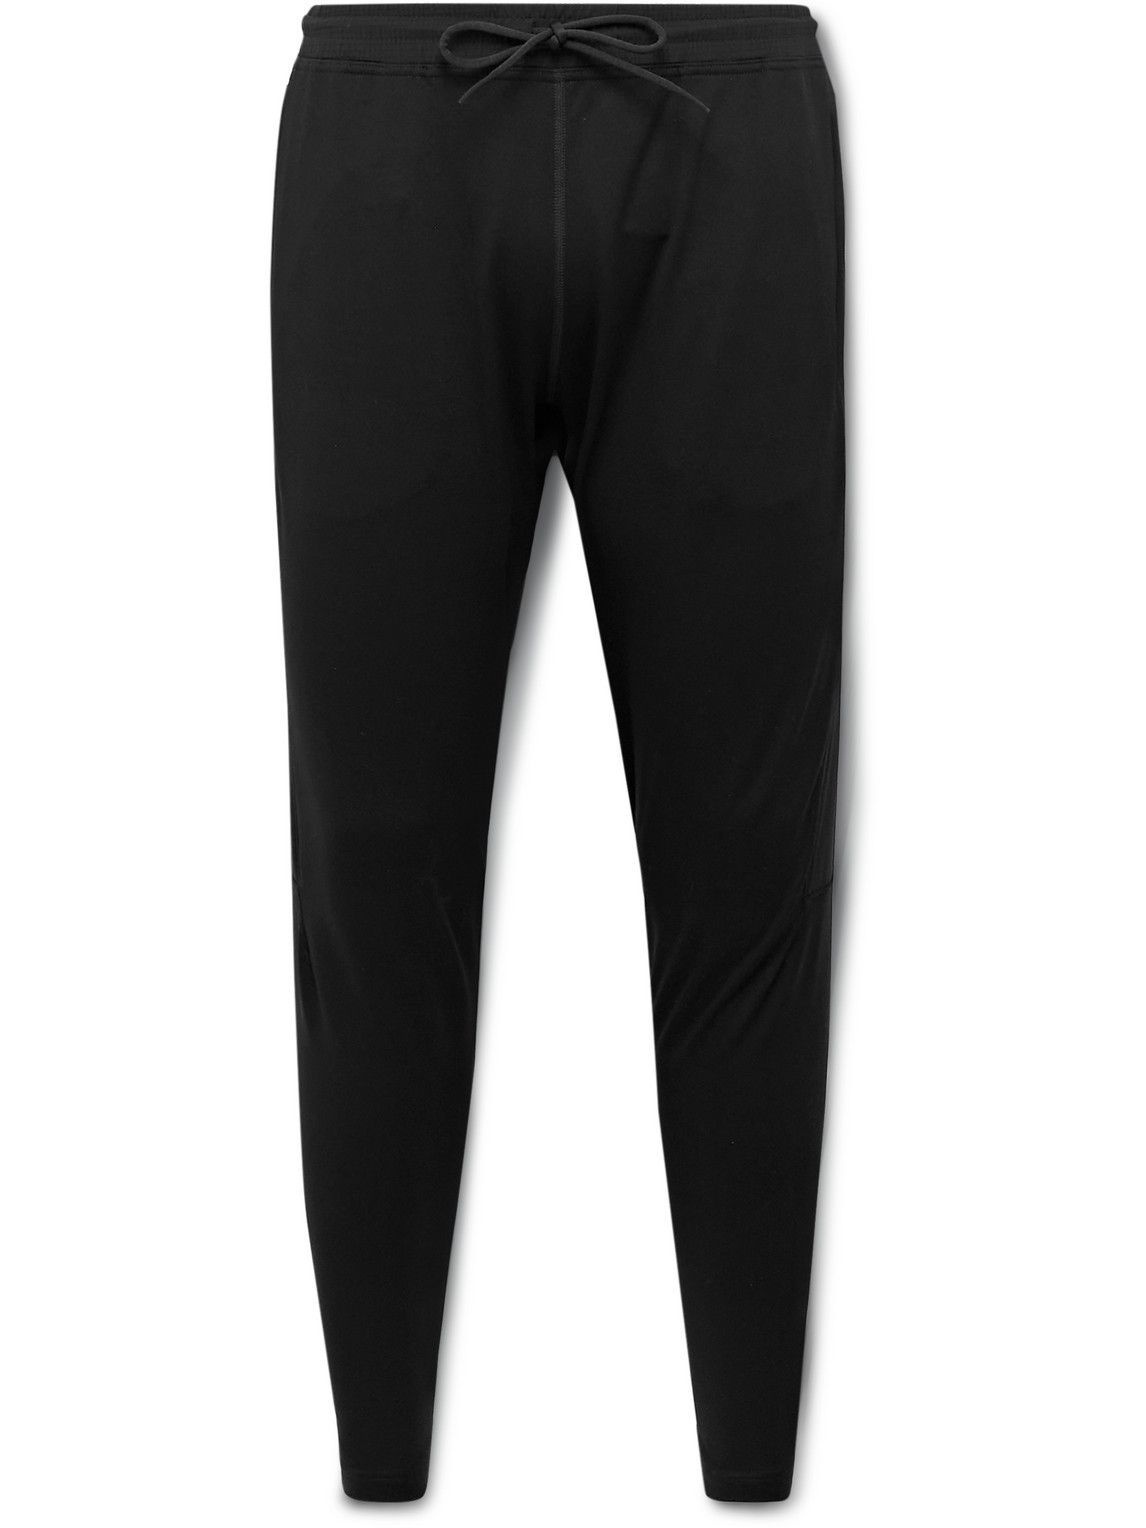 Reigning Champ - Ripstop-Trimmed Polartec Power Stretch Pro Sweatpants -  Black Reigning Champ